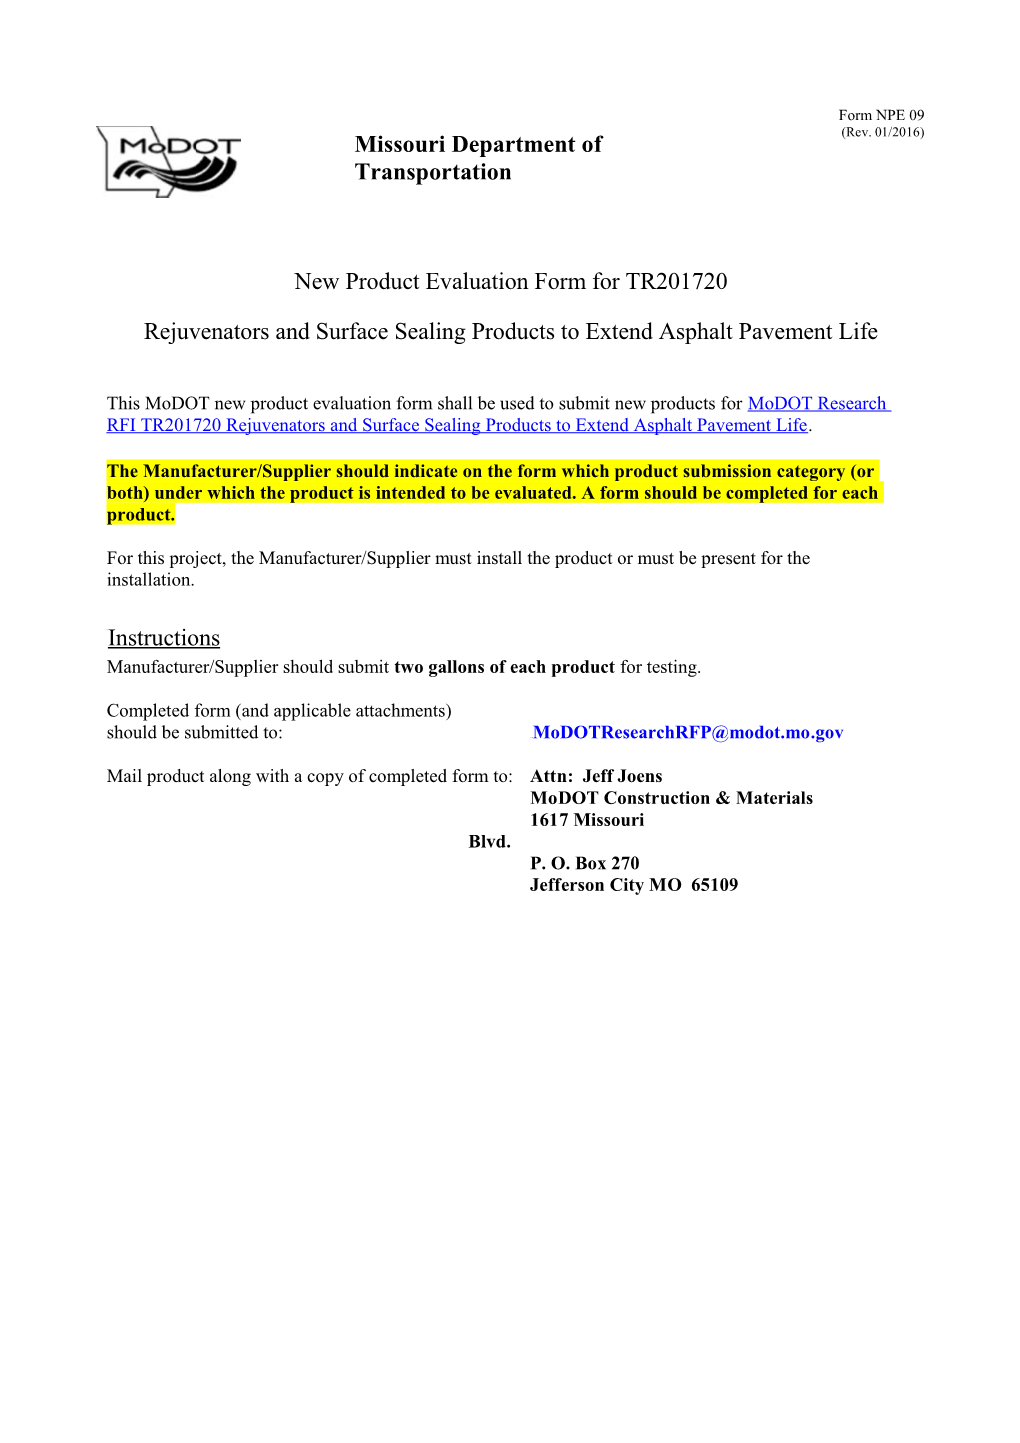 New Product Evaluation Form for TR201720